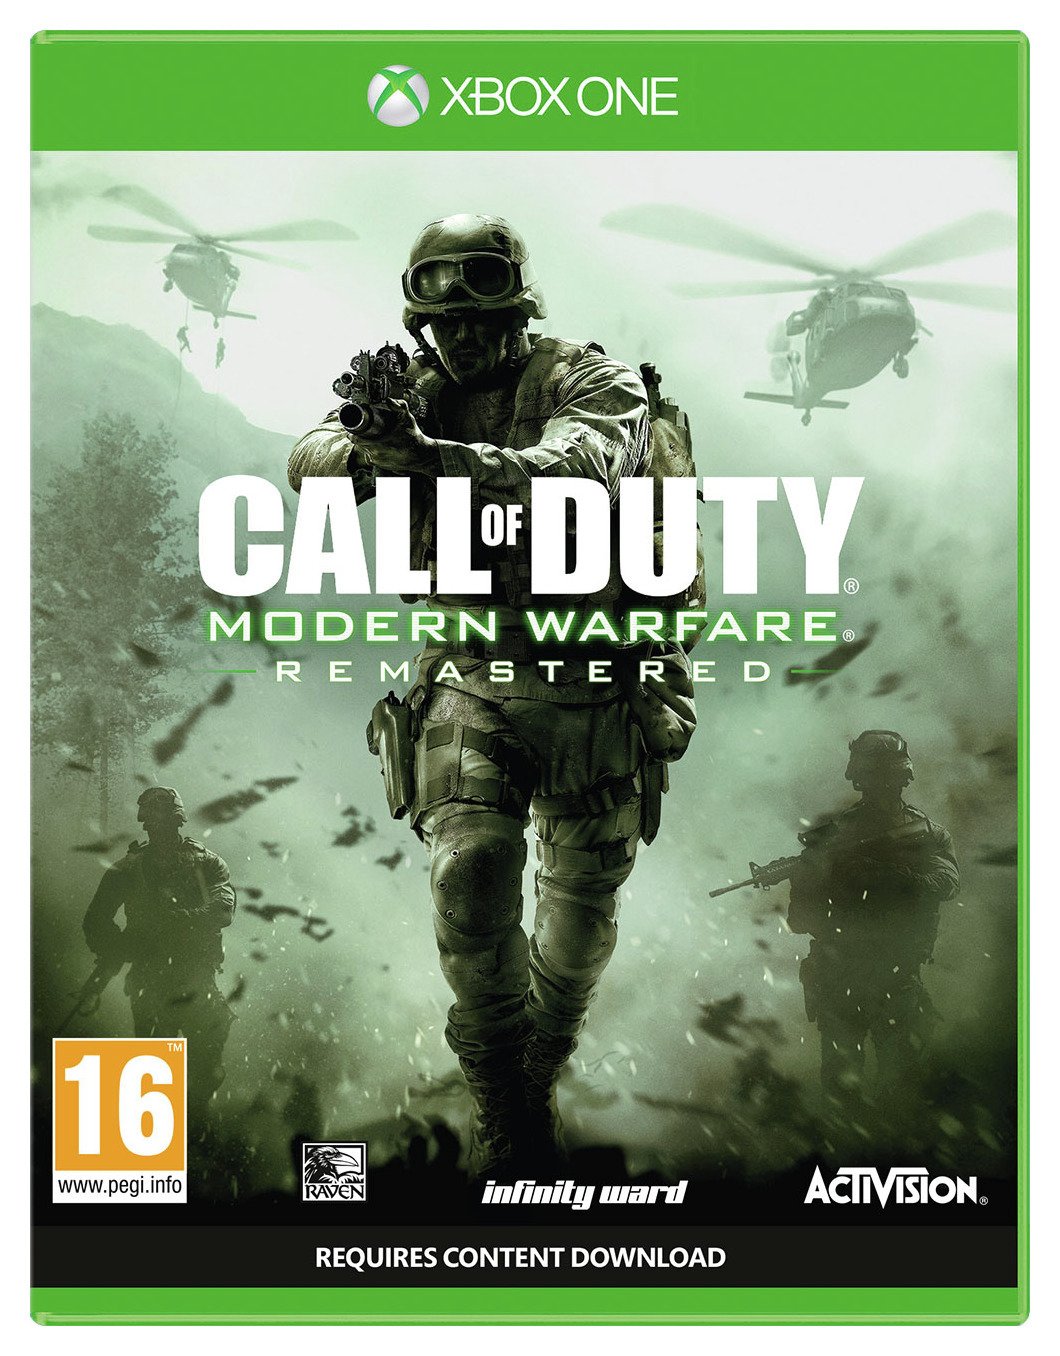 Call of Duty 4: Modern Warfare Xbox One Game Review